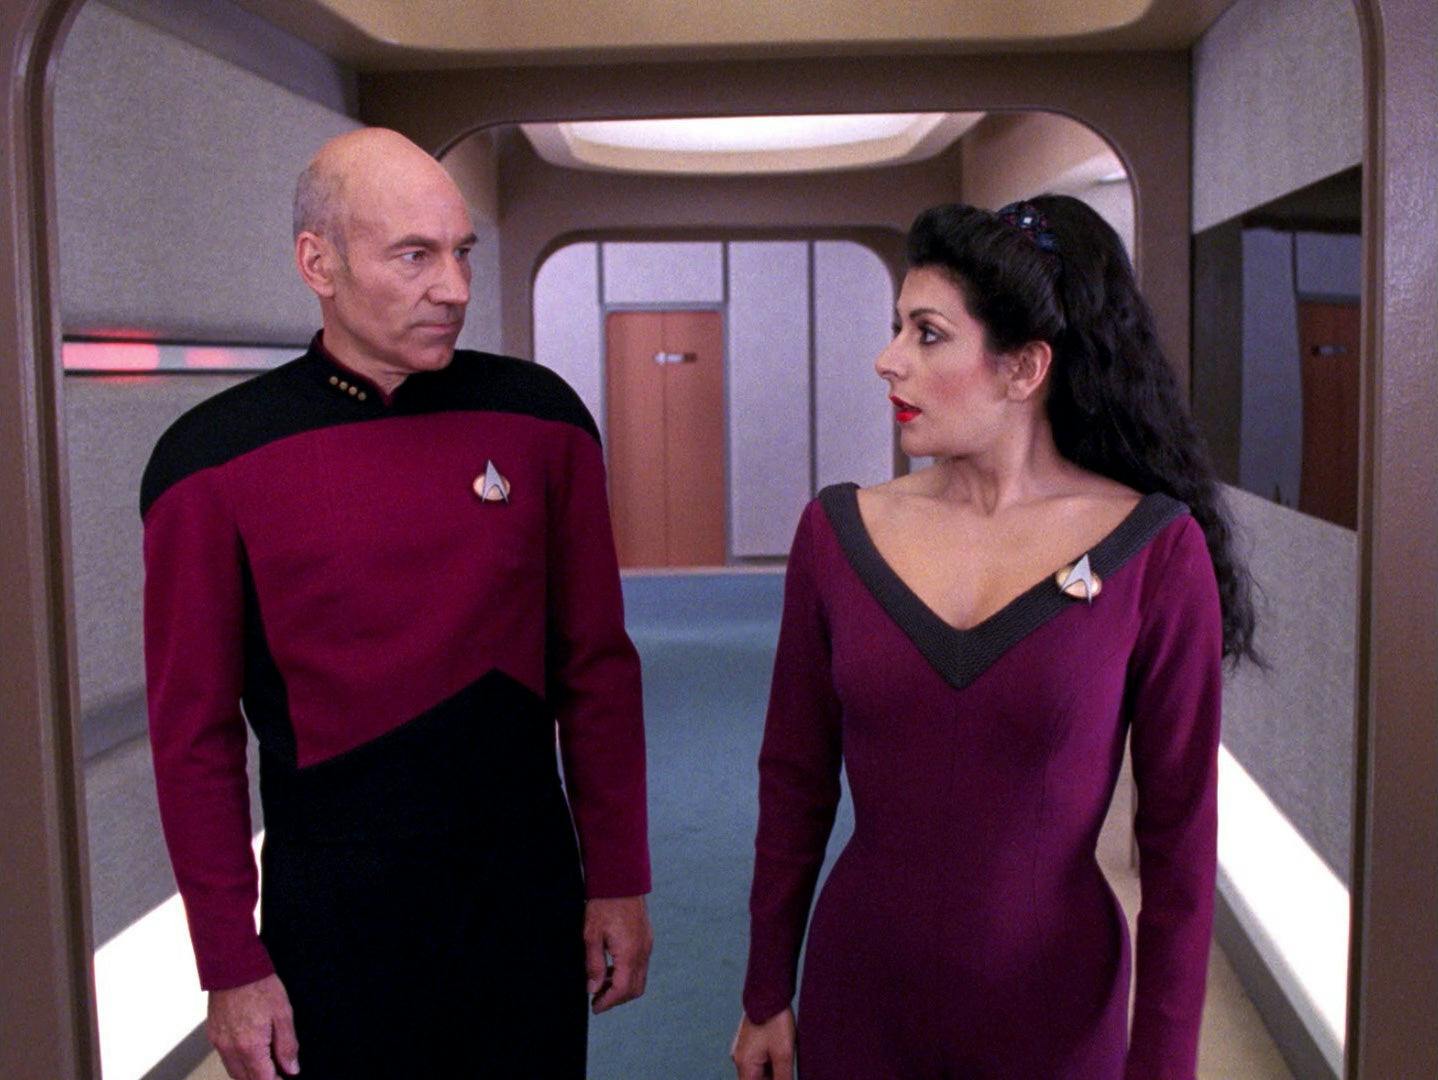 Deanna Troi offers Picard her counsel as they walk down the corridor in 'The Bonding'